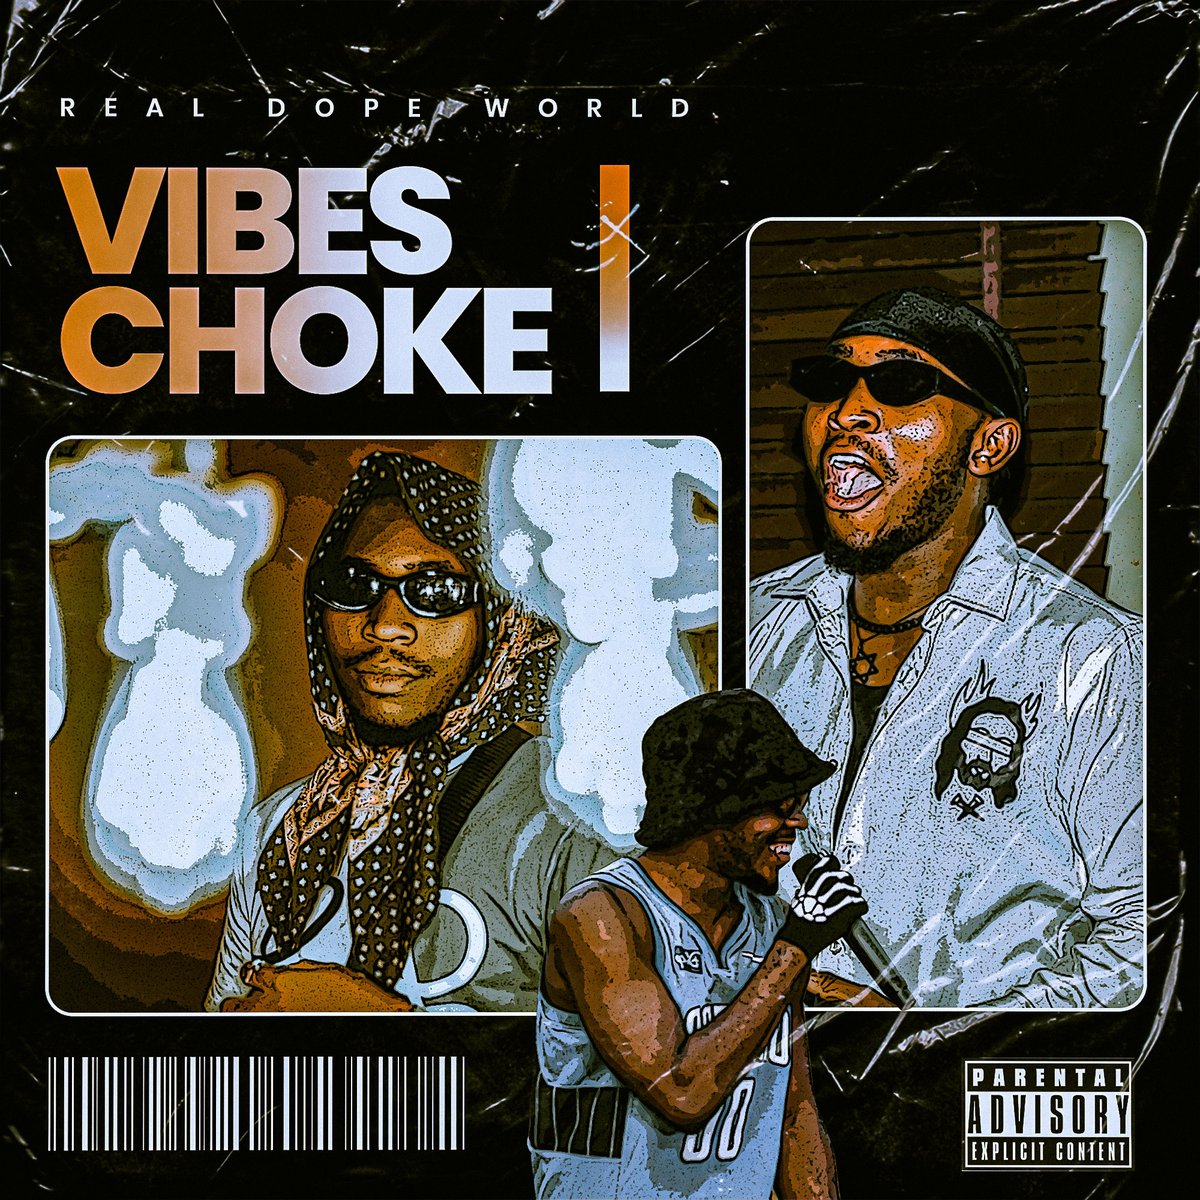 @HopeRapidfire DOPE IS AT IT AGAIN, THE BRAND REAL DOPE WORLD HAS BEEN SO COMFORTABLE WORKING WITH RAPIDFIRE MUSIC, HE IS BACK AGAIN WITH VIBES CHOKE, WHICH IS ABOUT TO DROP IN A BIT. TRUST ME ITS NOTHING LIKE YOU HAVE HEARD.@Yellarapidfire @RealDopeWorld @rapidfire9ja